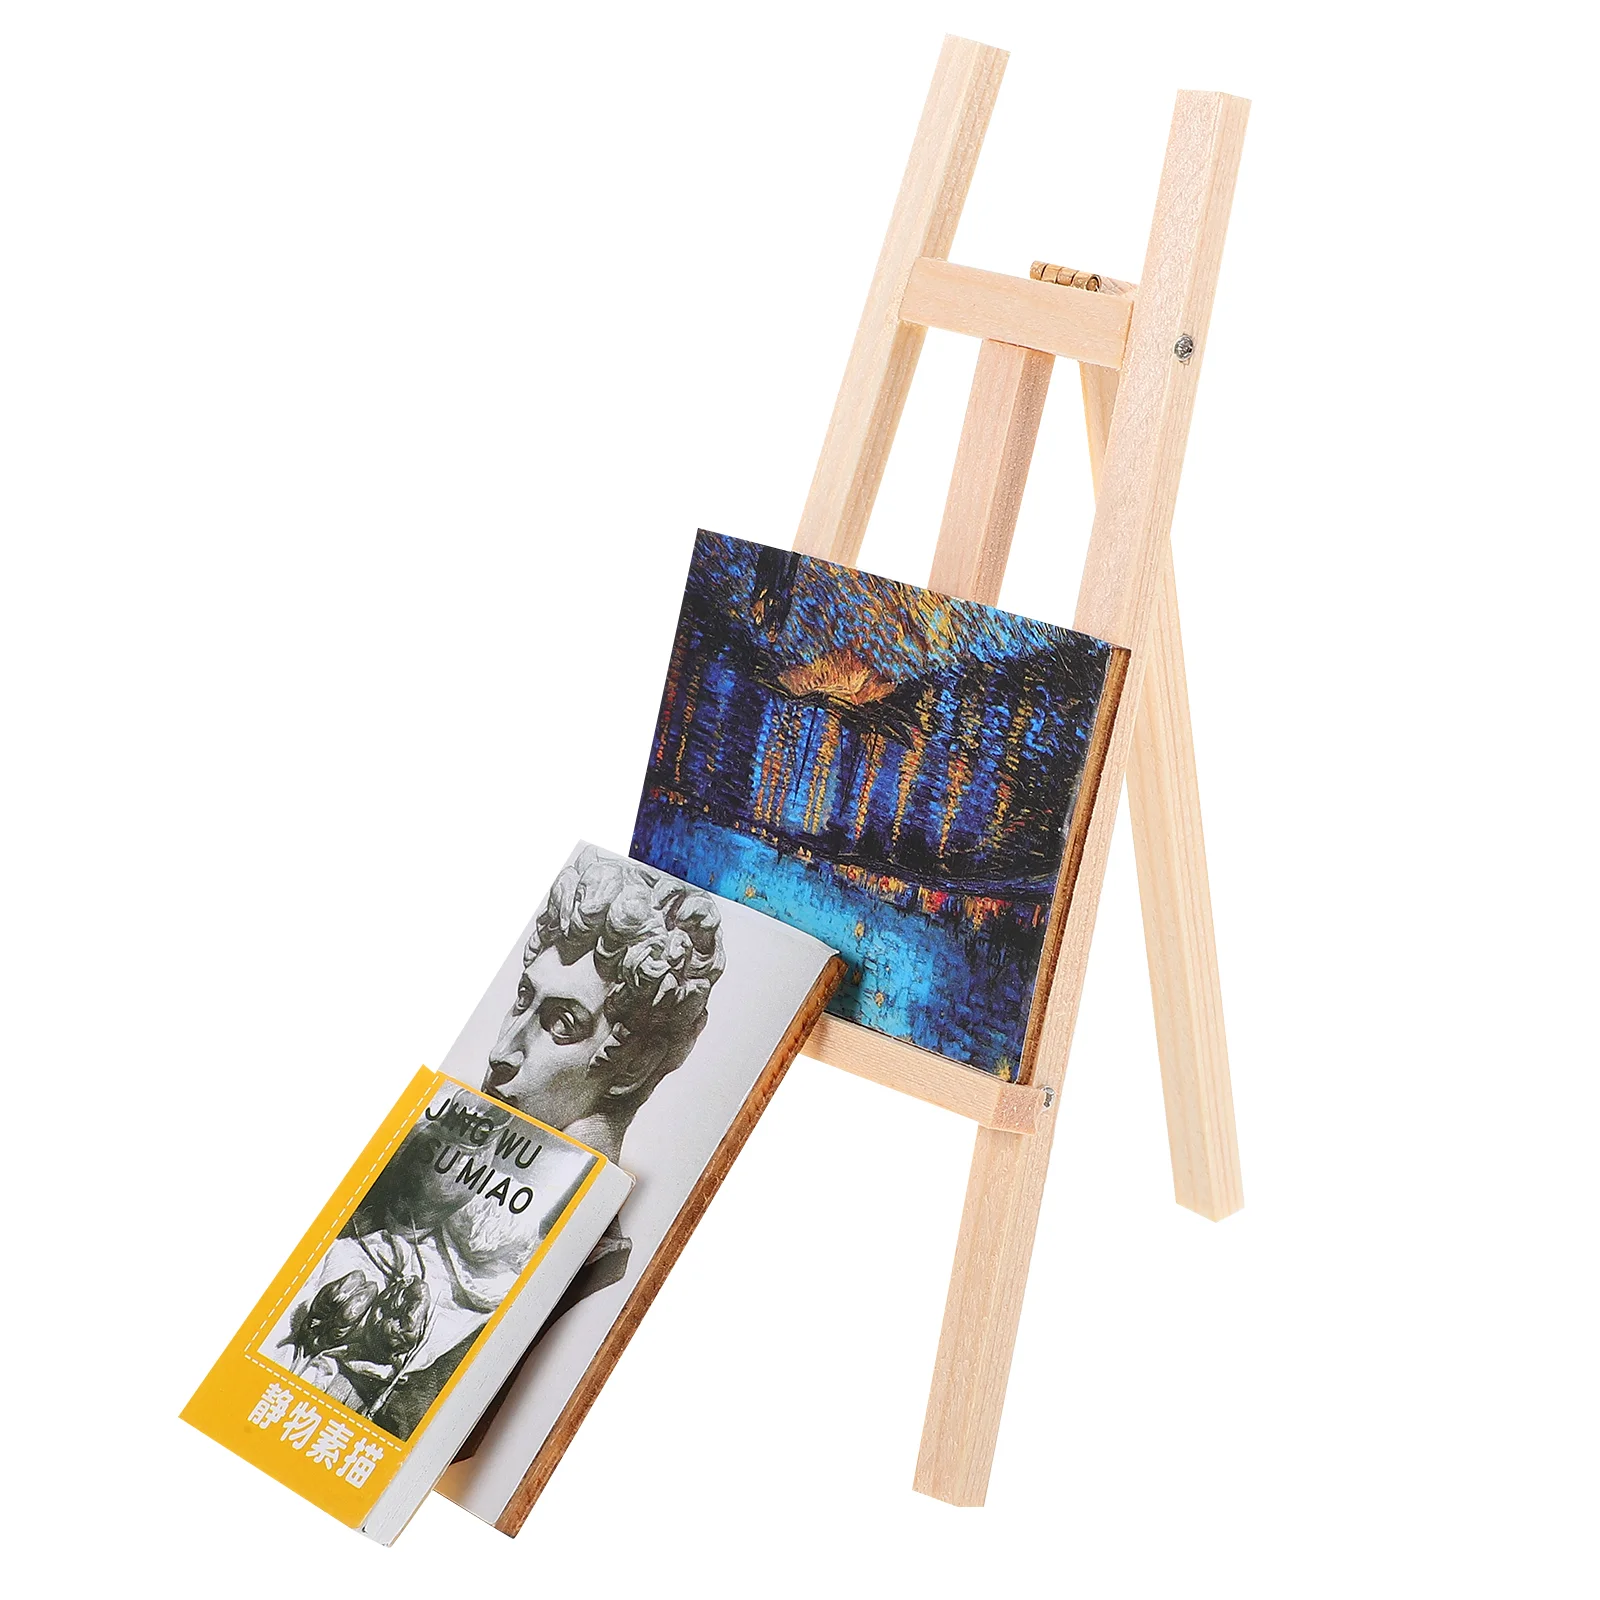 House Decorative Painting Mini Adornment Miniature Easel Wooden Board Furniture Small Model mini wooden necklace rack storage bracelet stand holder necklace pendant window display easel showcase display holder board